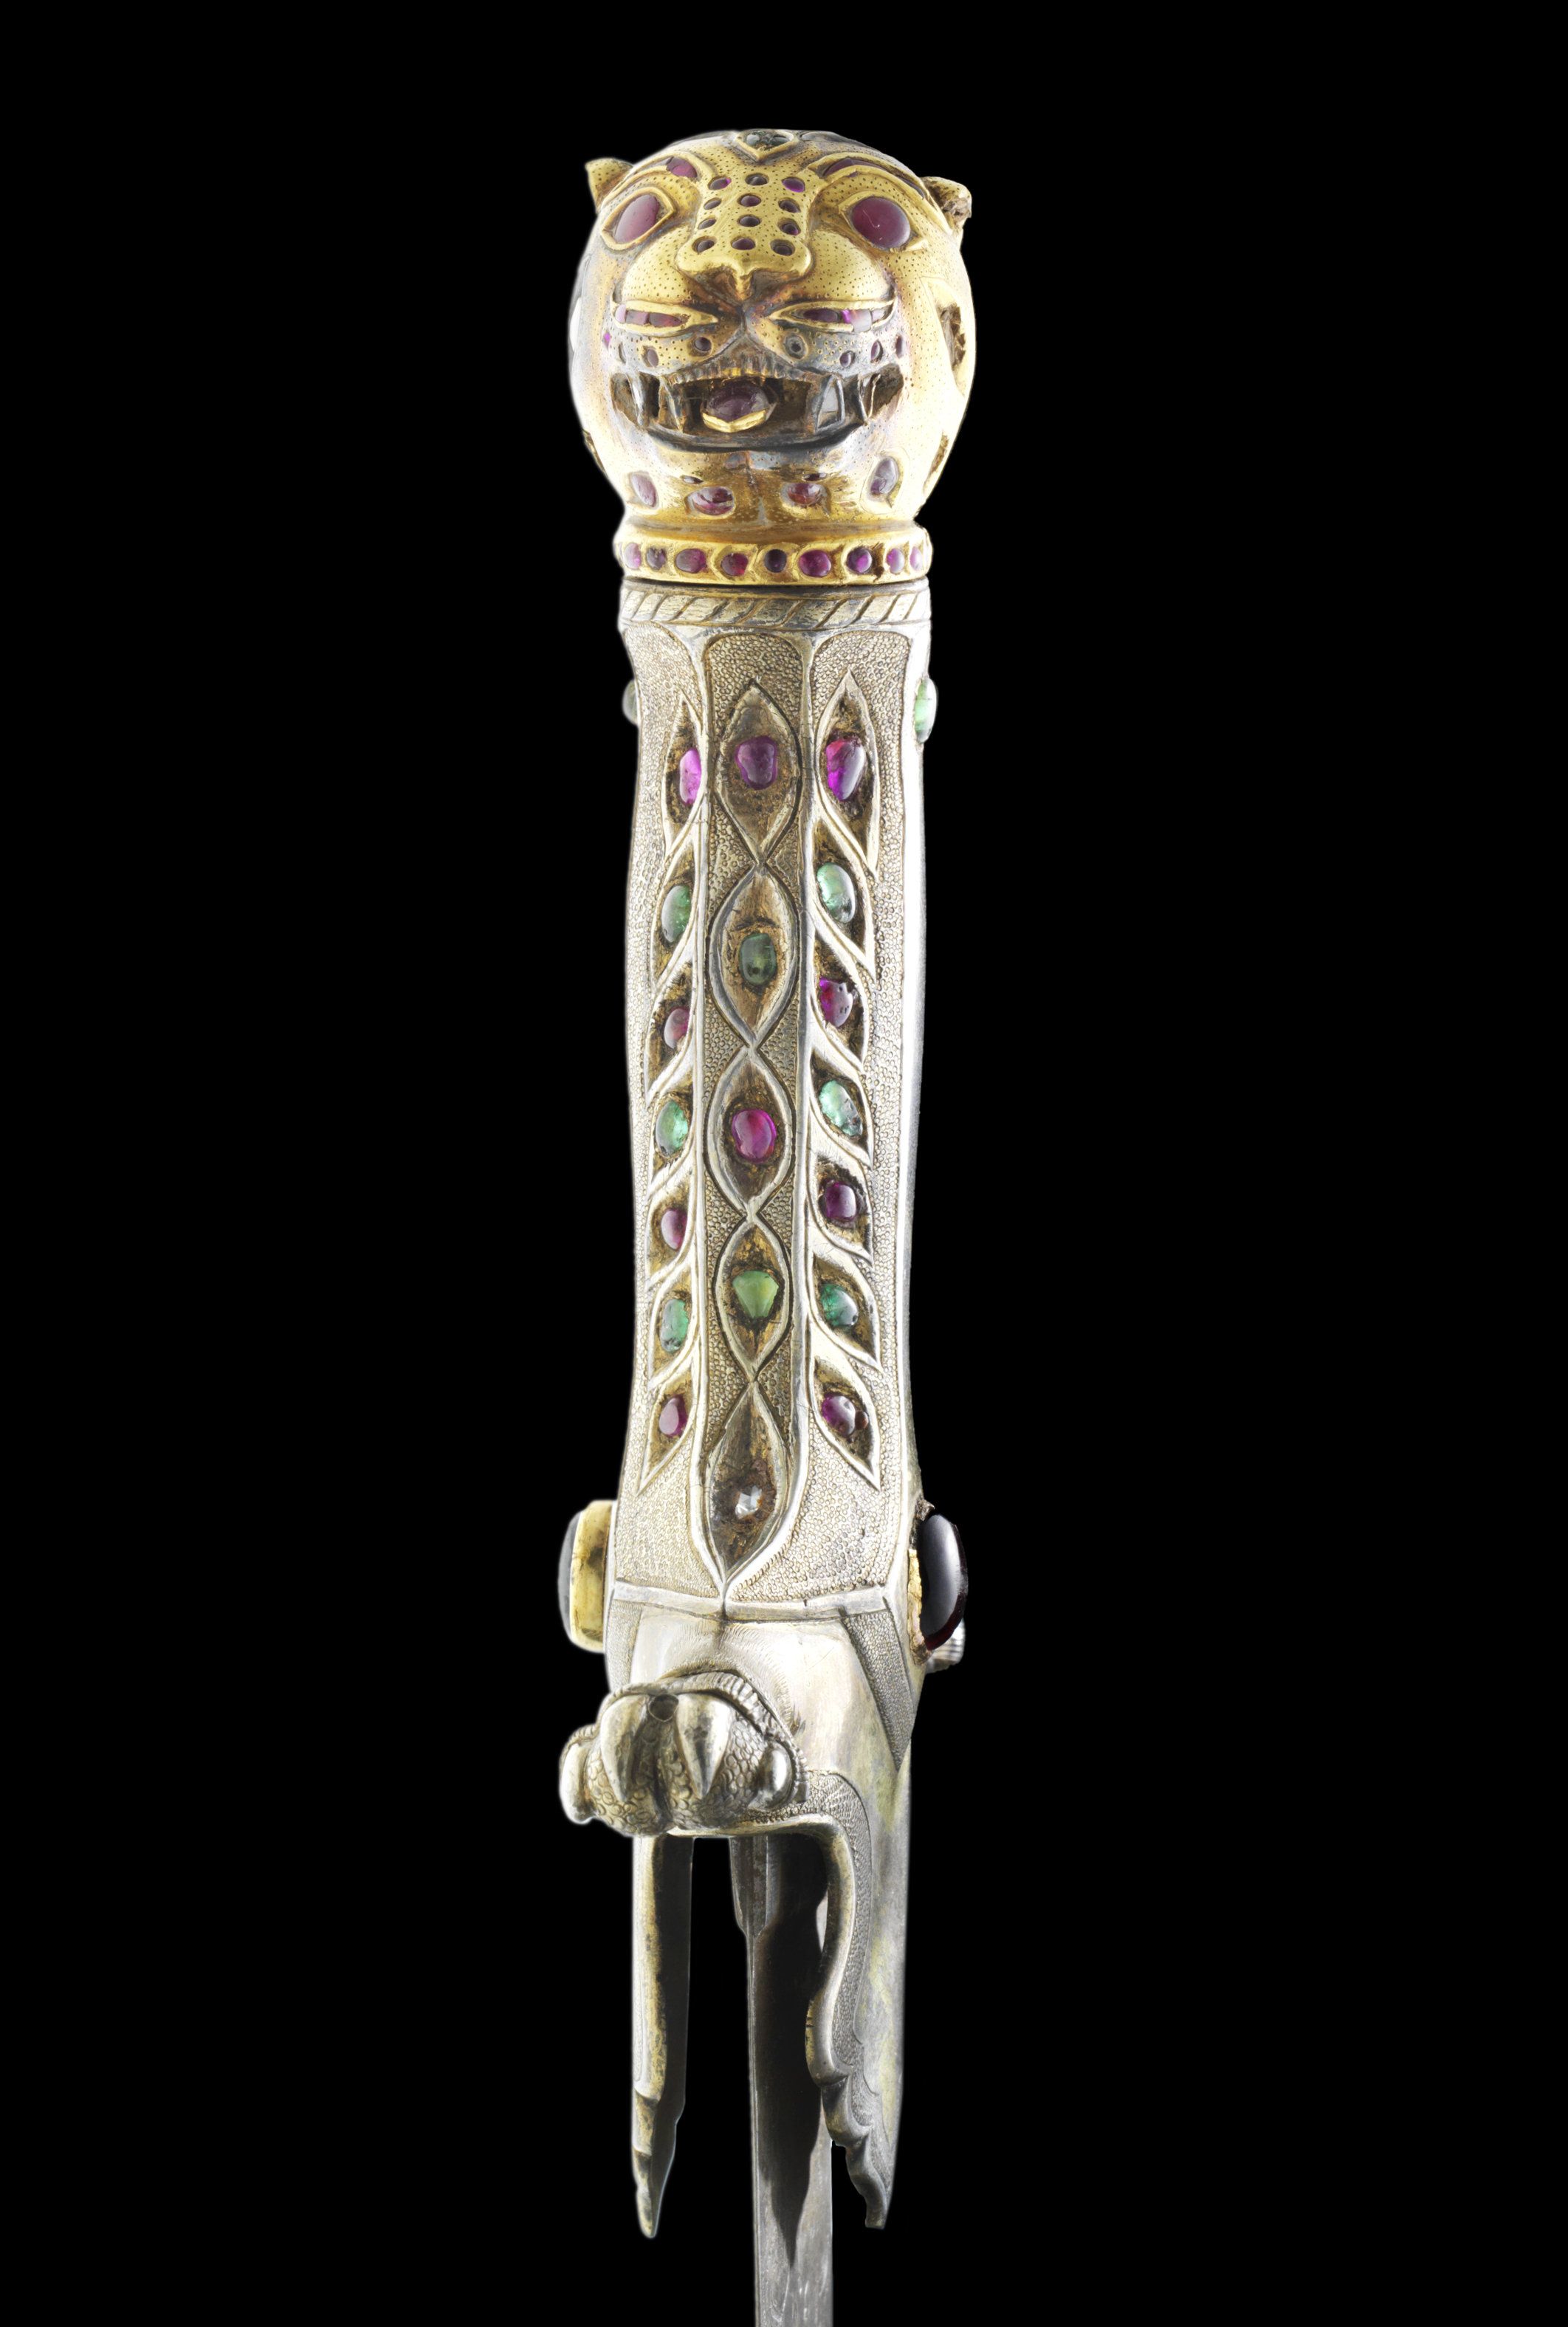 An Important Rare Gem Set Sword With Tiger's Head Pommel - Tipu Sultan Sword Price , HD Wallpaper & Backgrounds